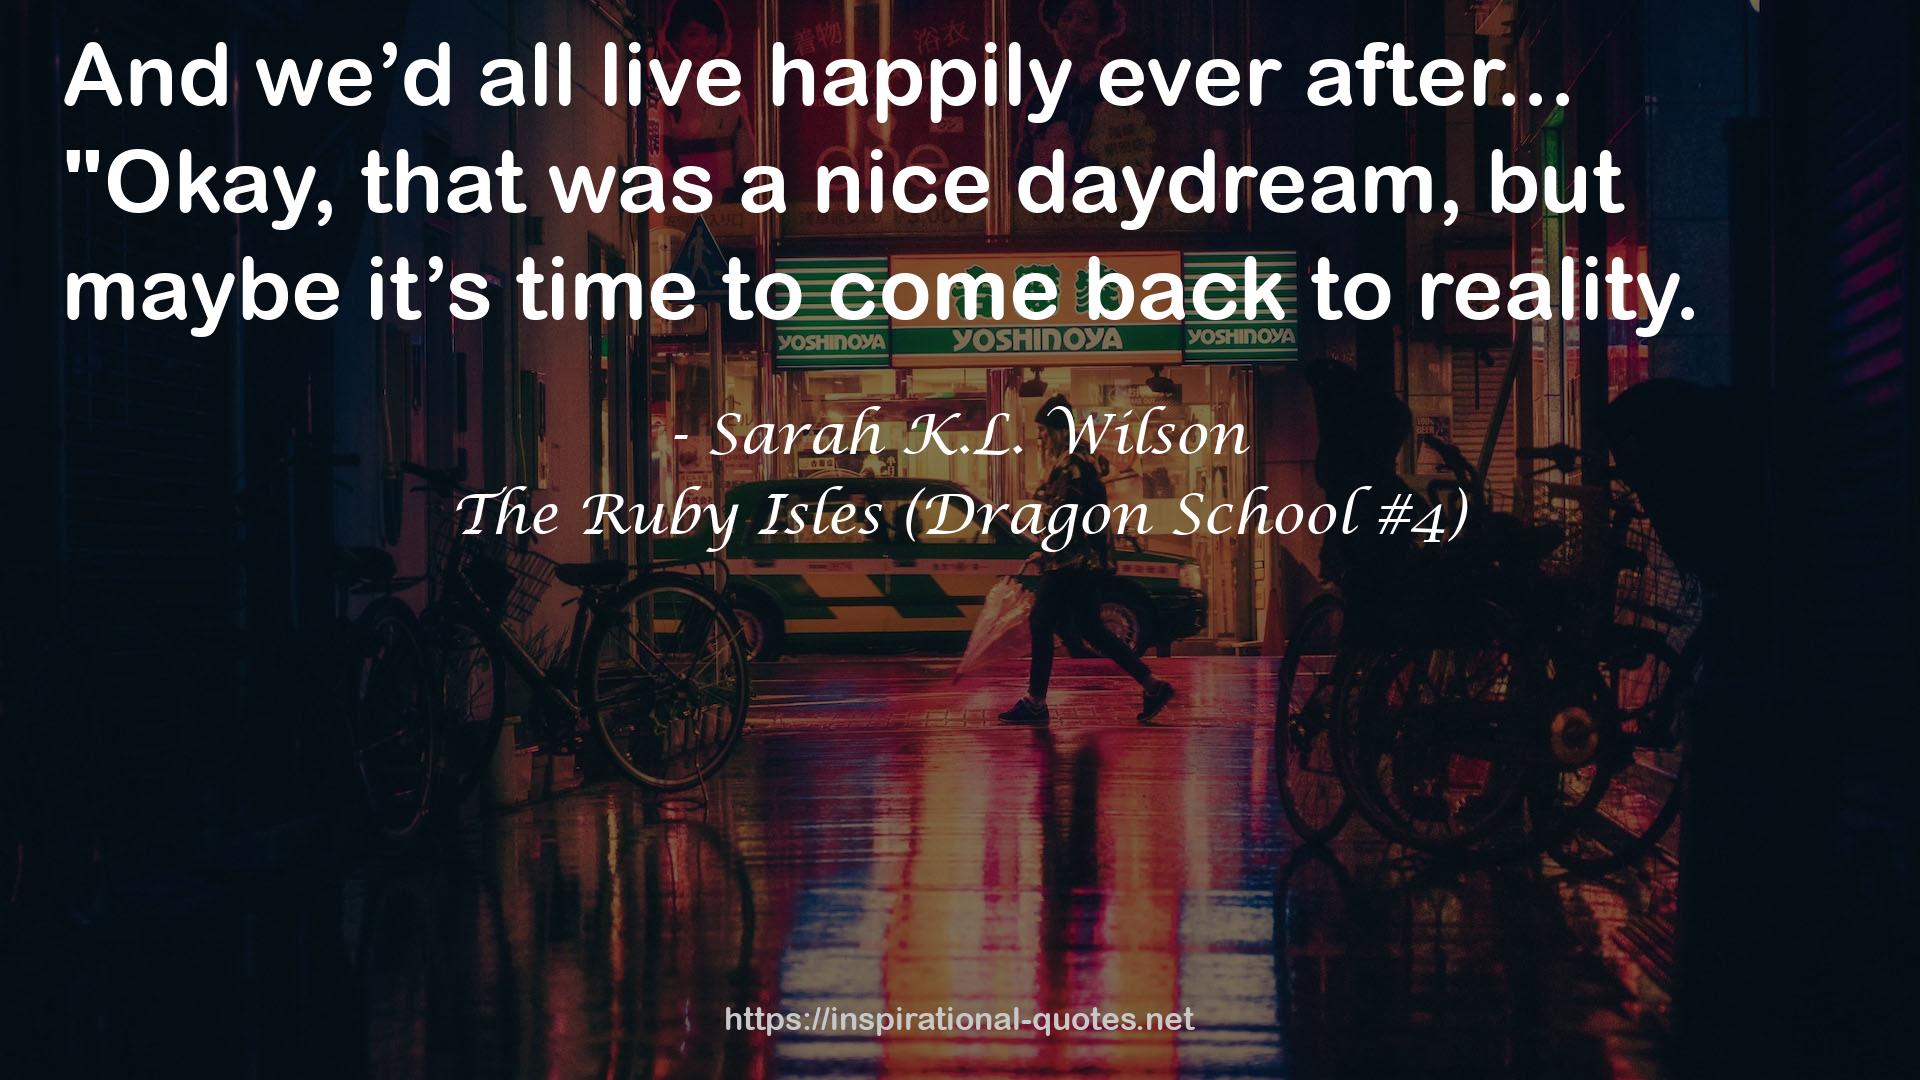 The Ruby Isles (Dragon School #4) QUOTES